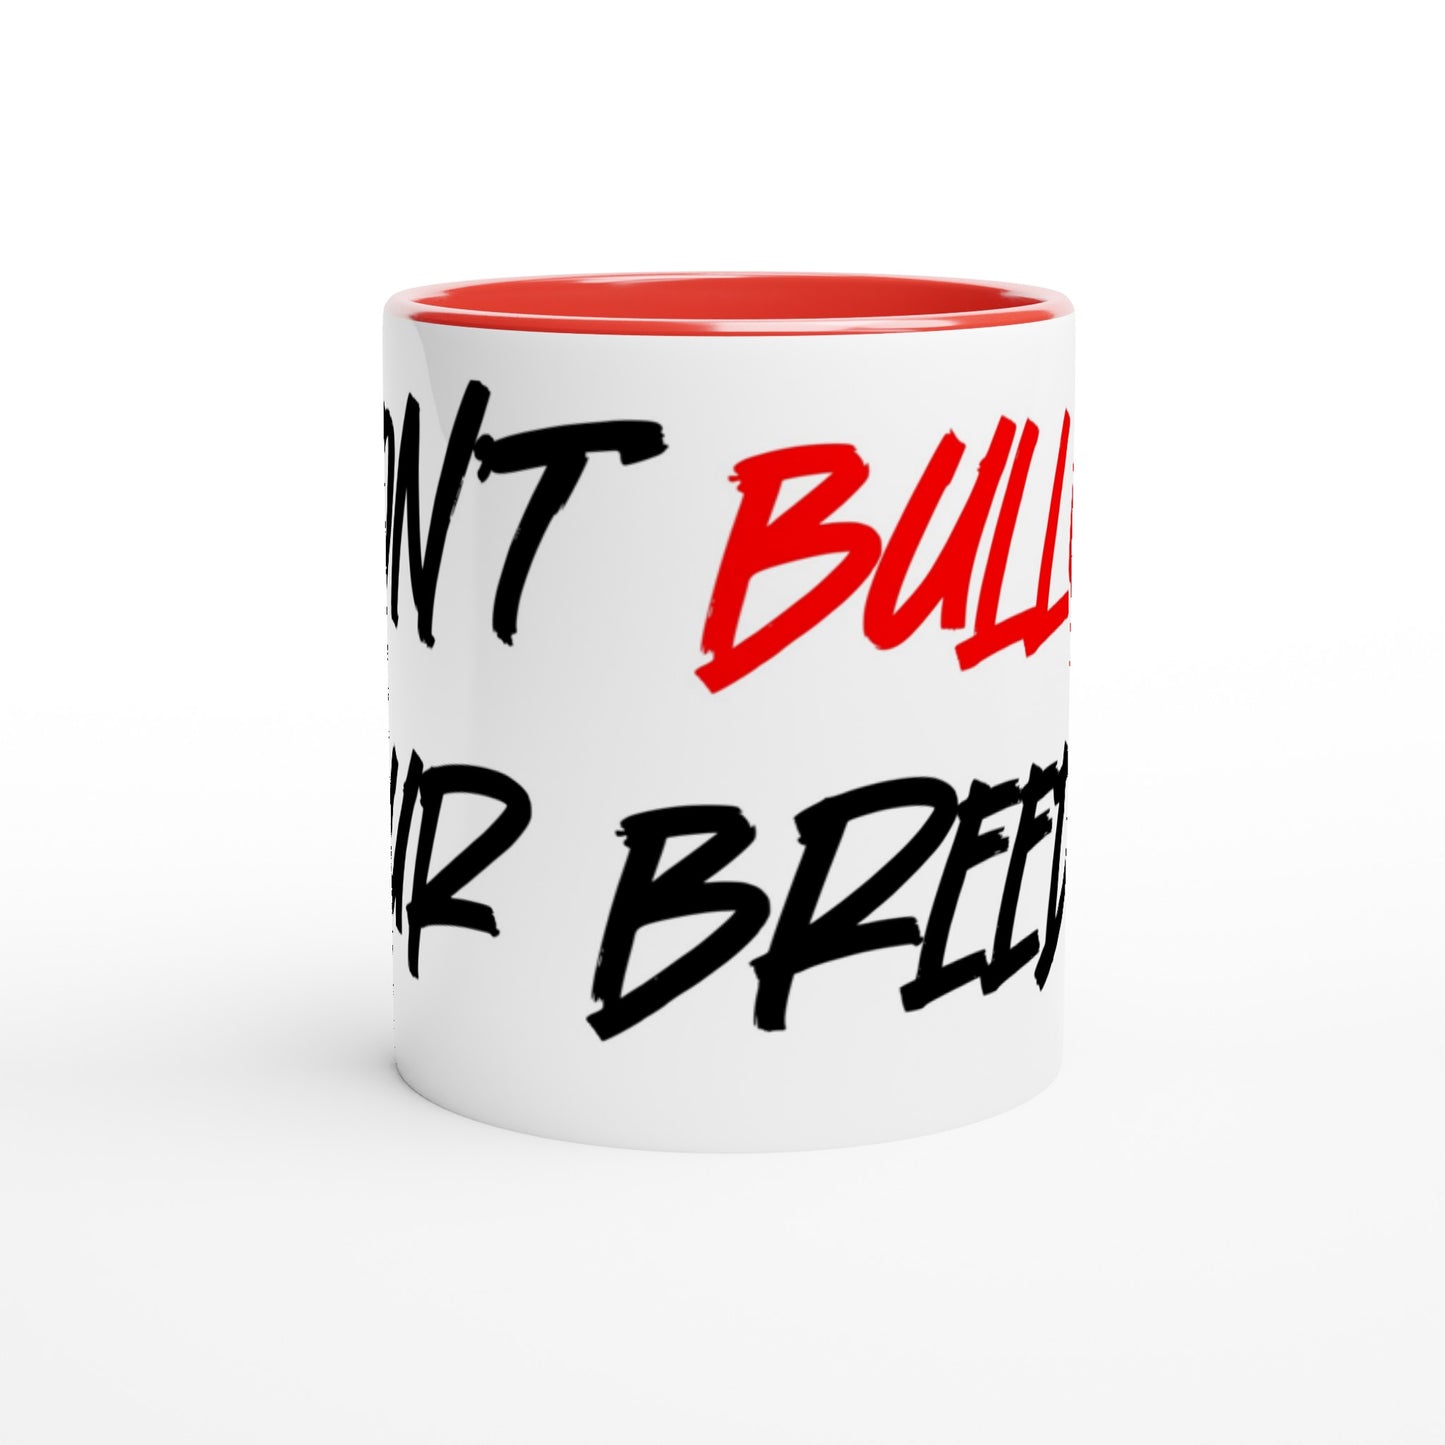 Don't Bully Our Breed Ceramic Mug with Red